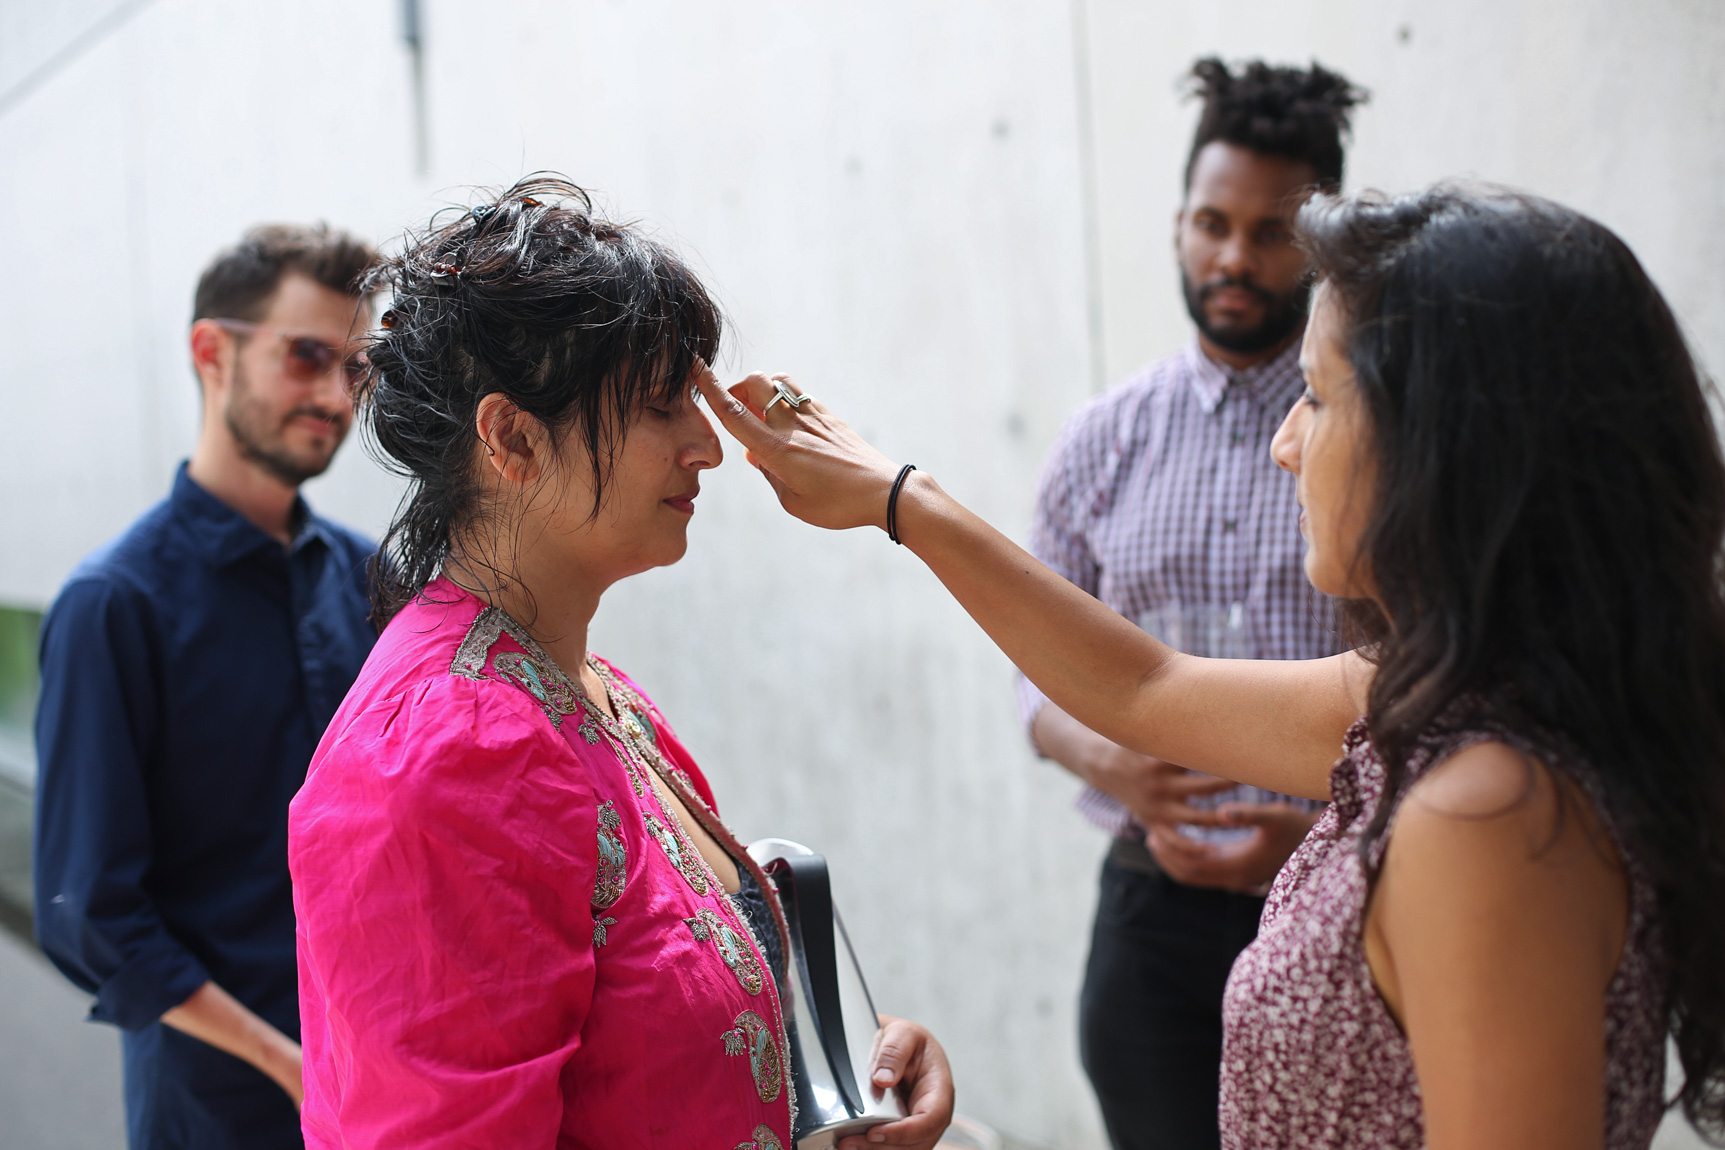 A collaborator performs a blessing and marks Bhanu Kapil's forehead in the Water Court as others observe.